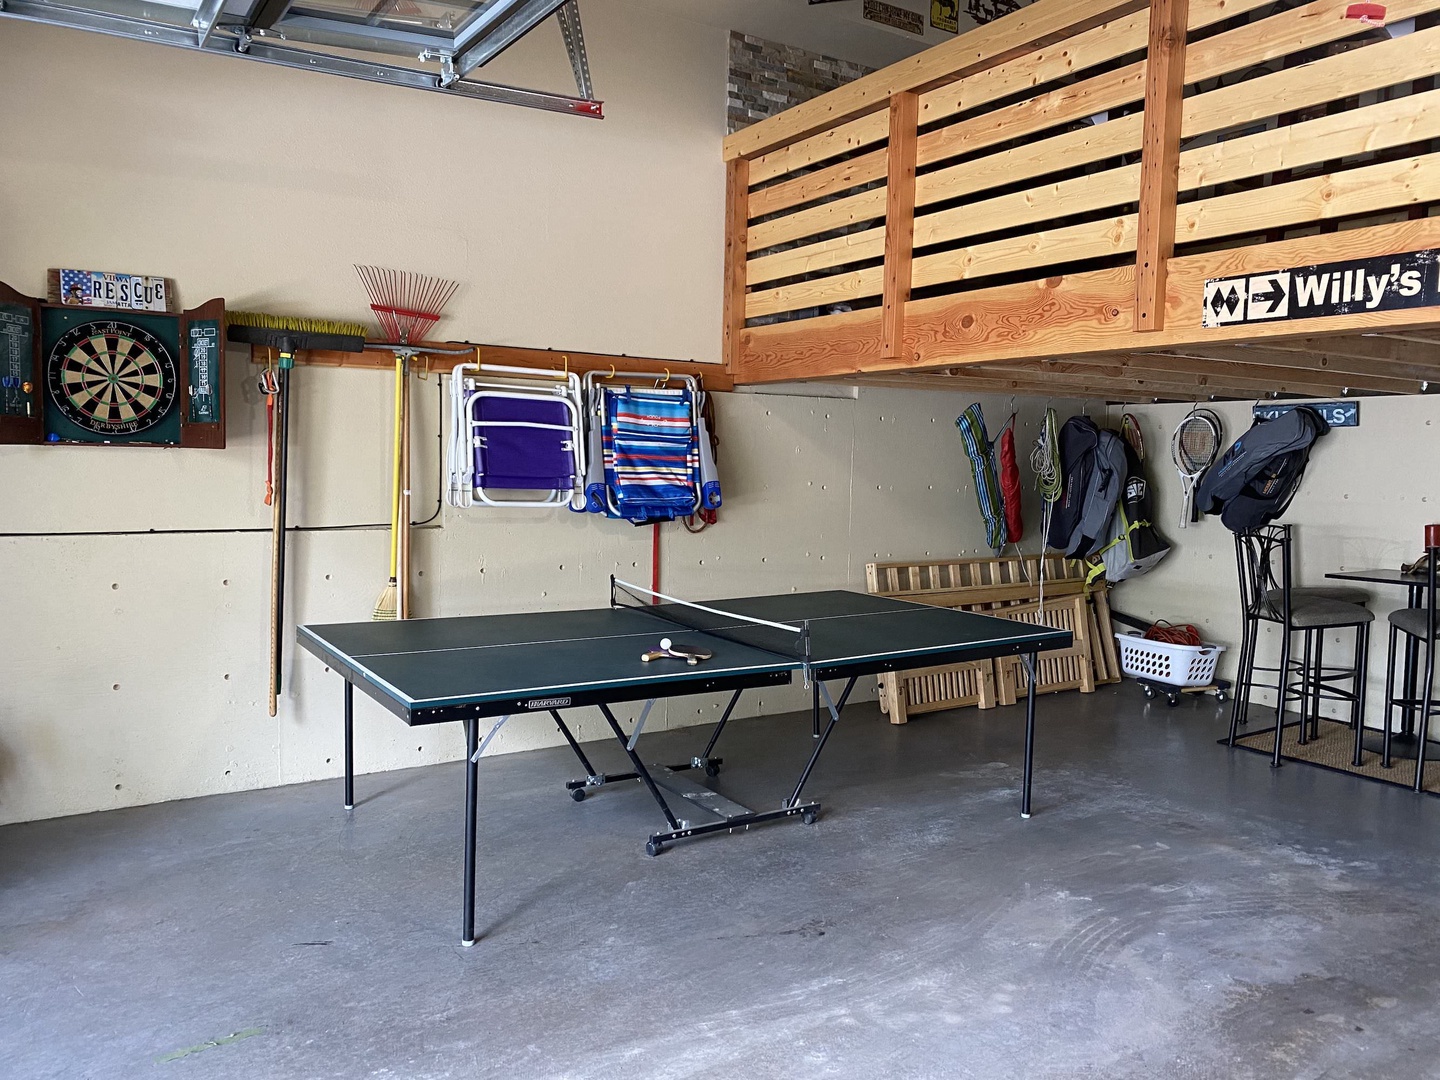 Game room with ping pong table in garage